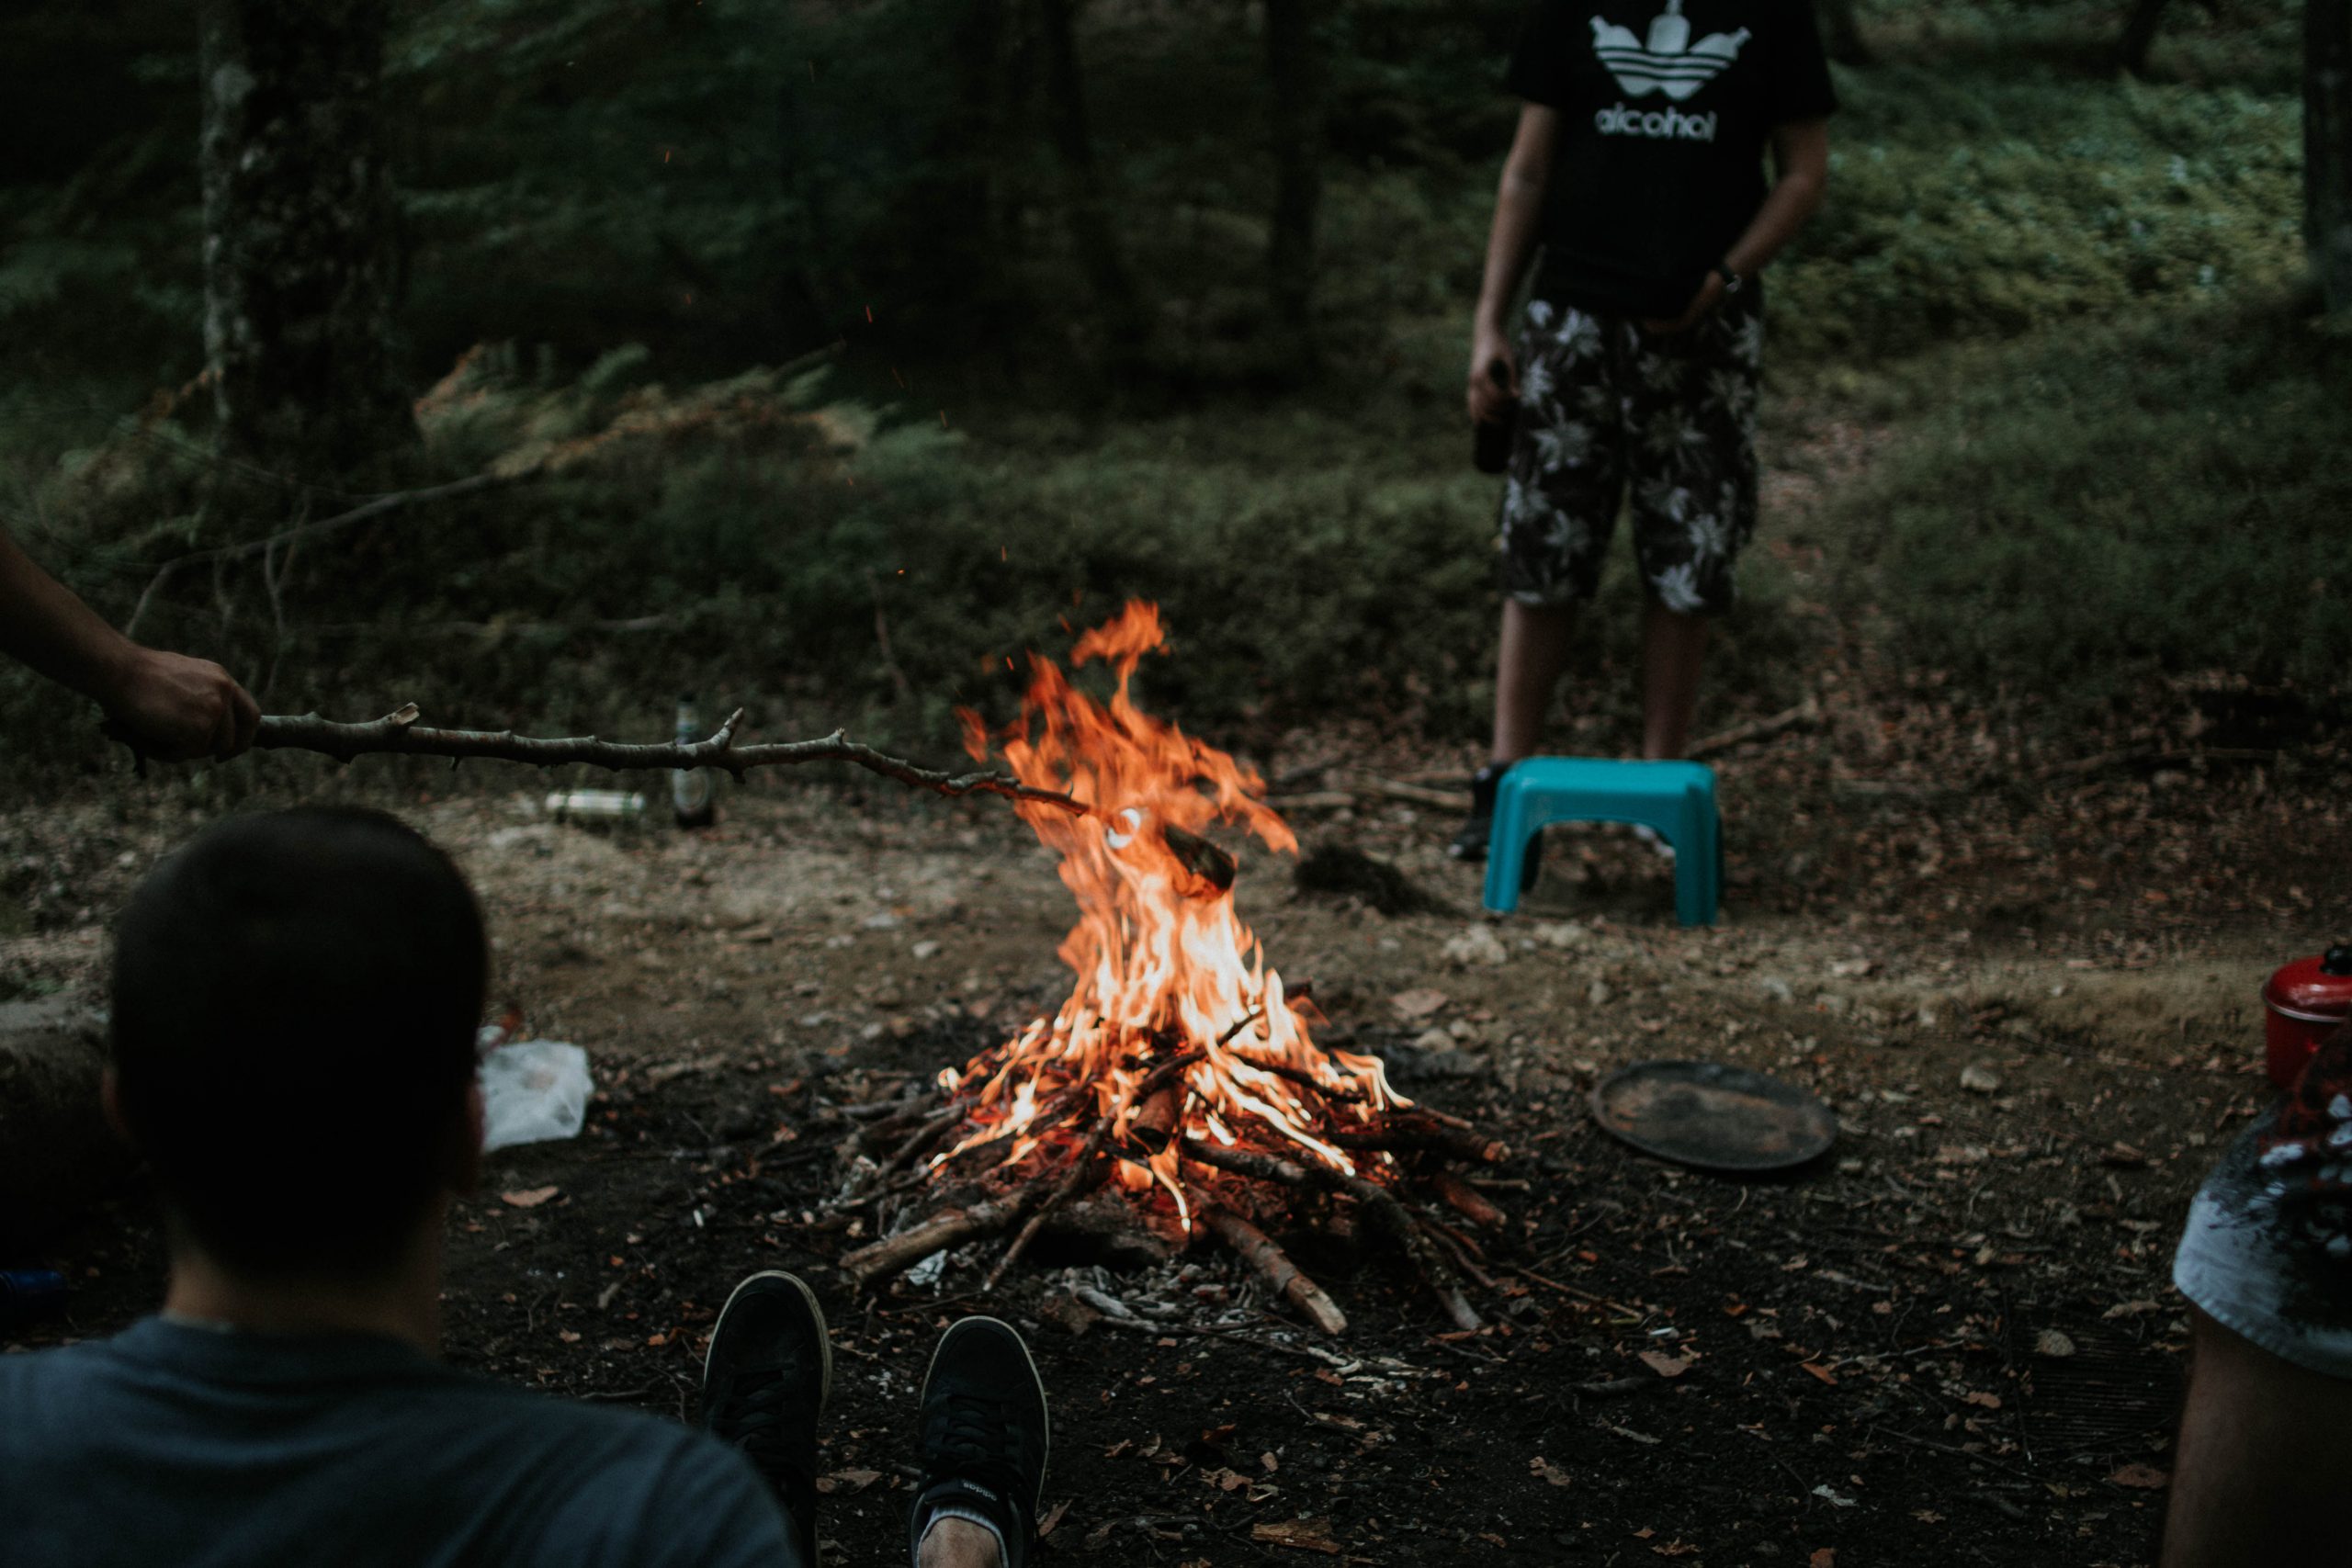 The more prepared you are for your camping trip, the better experience you will have. Making lists and being organized is the best way to prepare for your trip. In this post I cover all the essentials for your camping food checklist.